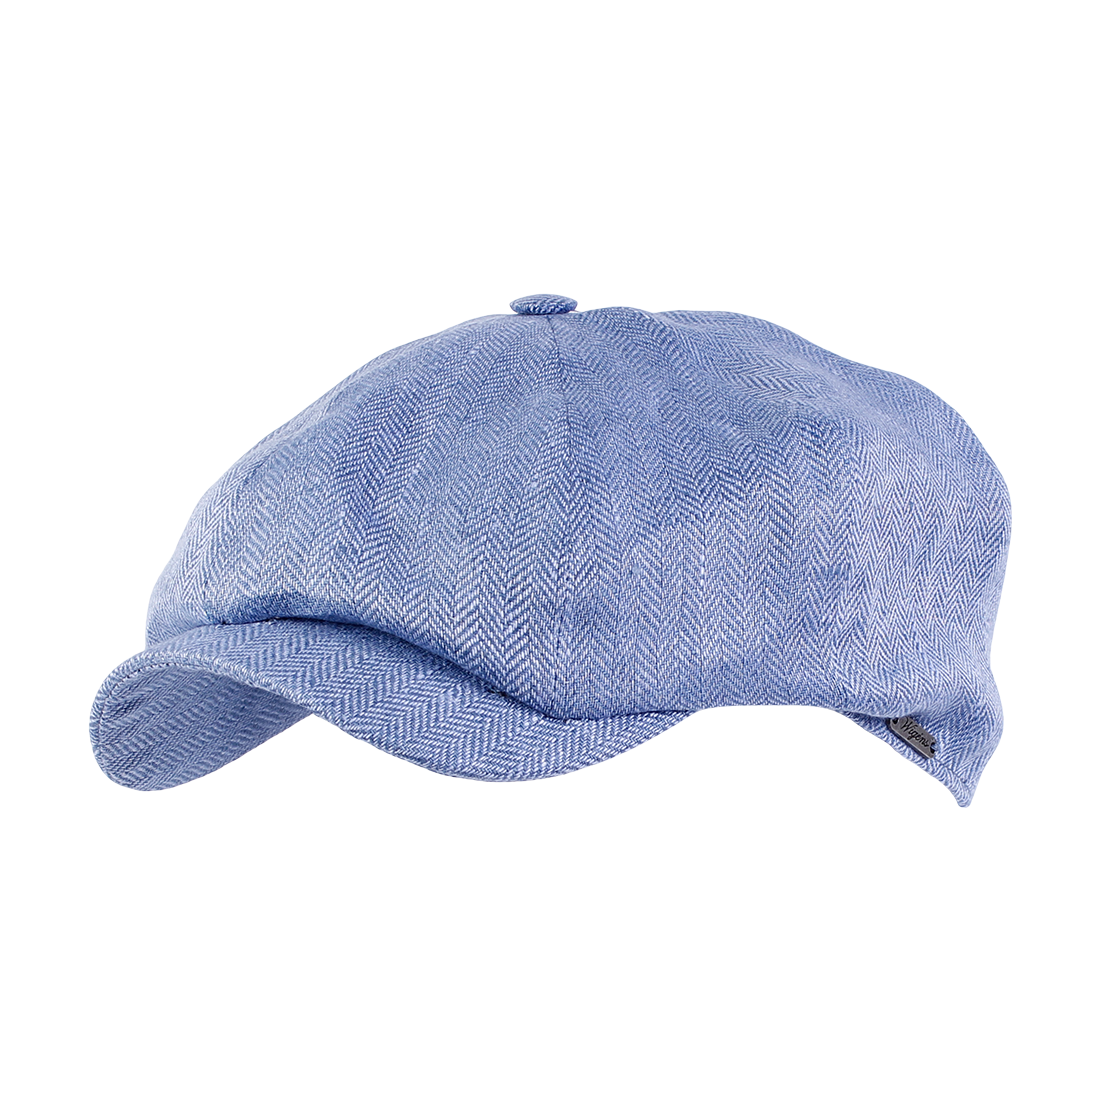 Newsboy Classic Cap in Classic Linen Herringbone (Choice of Colors) by Wigens